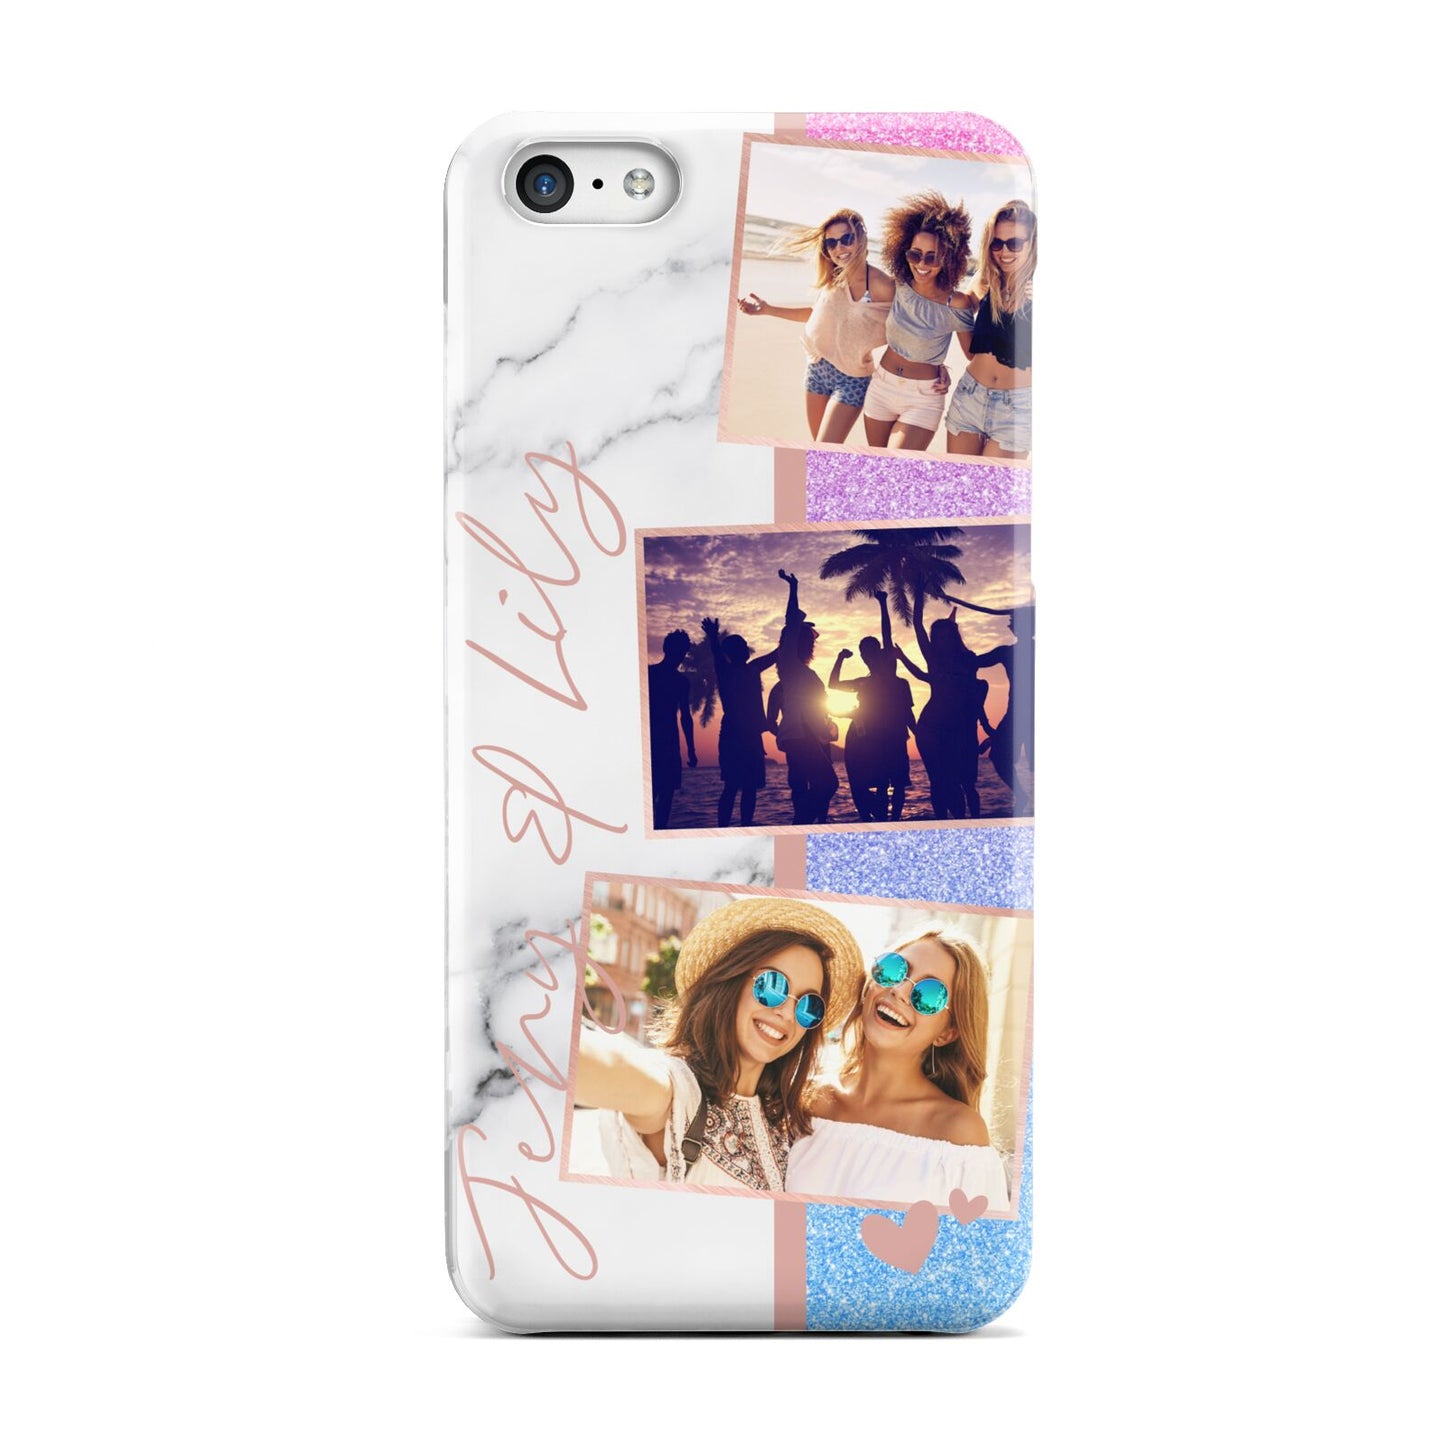 Glitter and Marble Photo Upload with Text Apple iPhone 5c Case